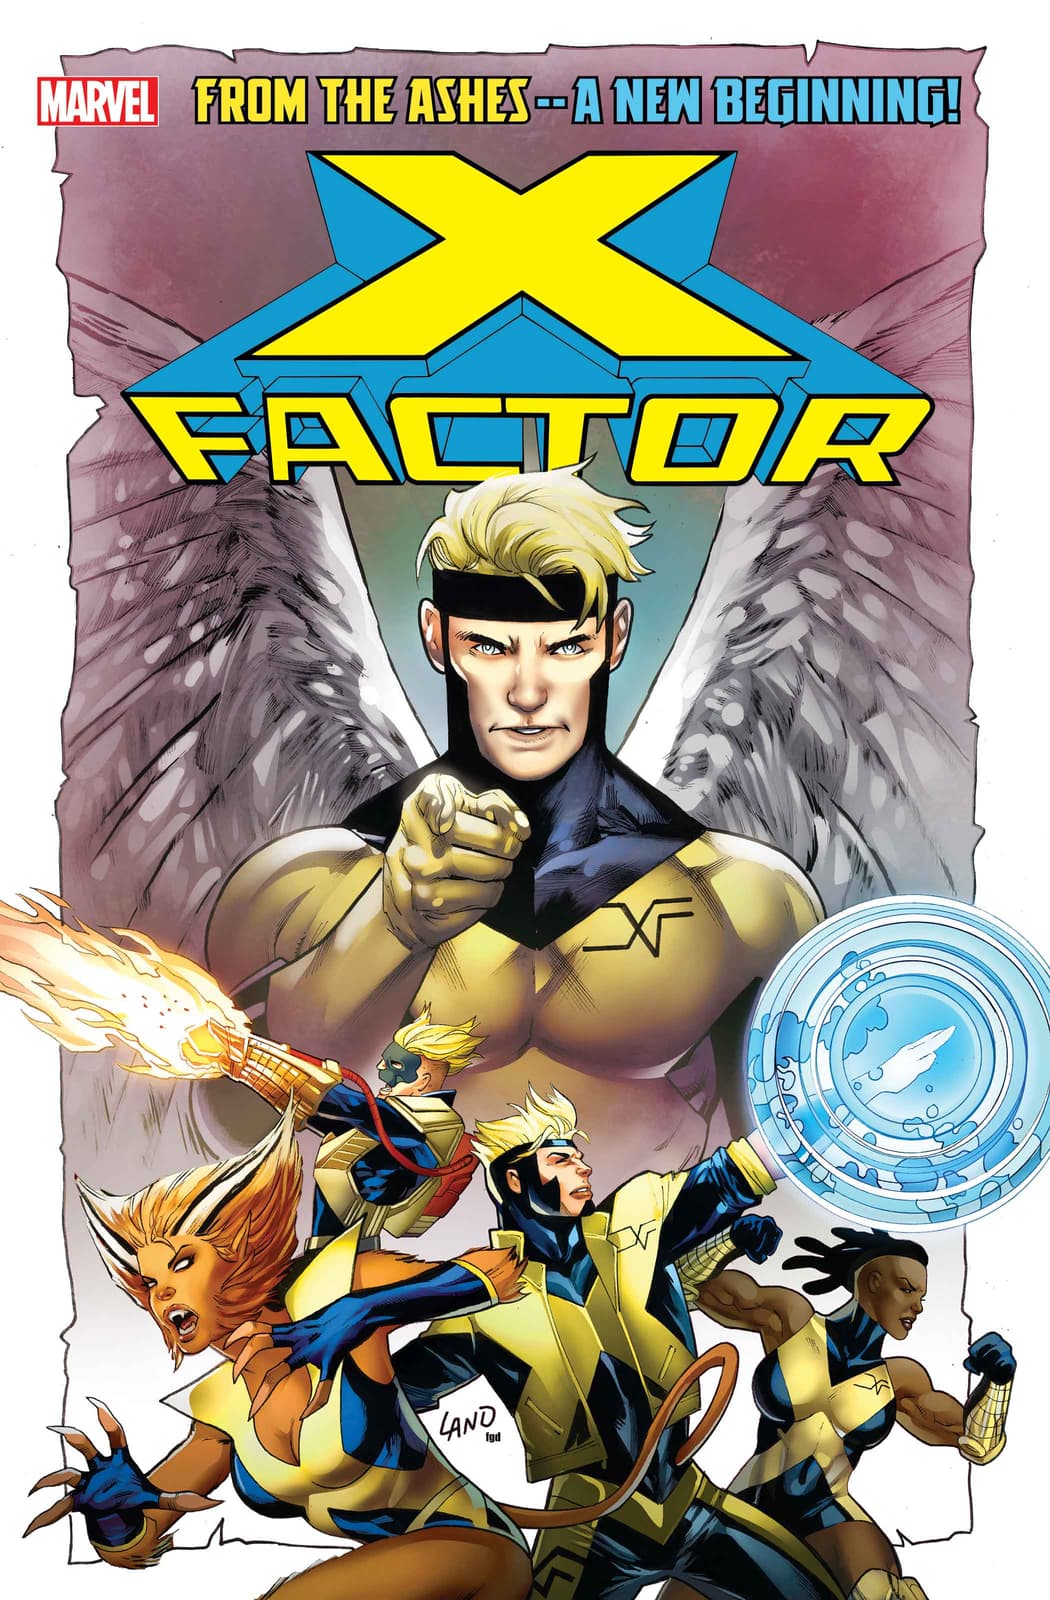 X-FACTOR #1 cover by Greg Land